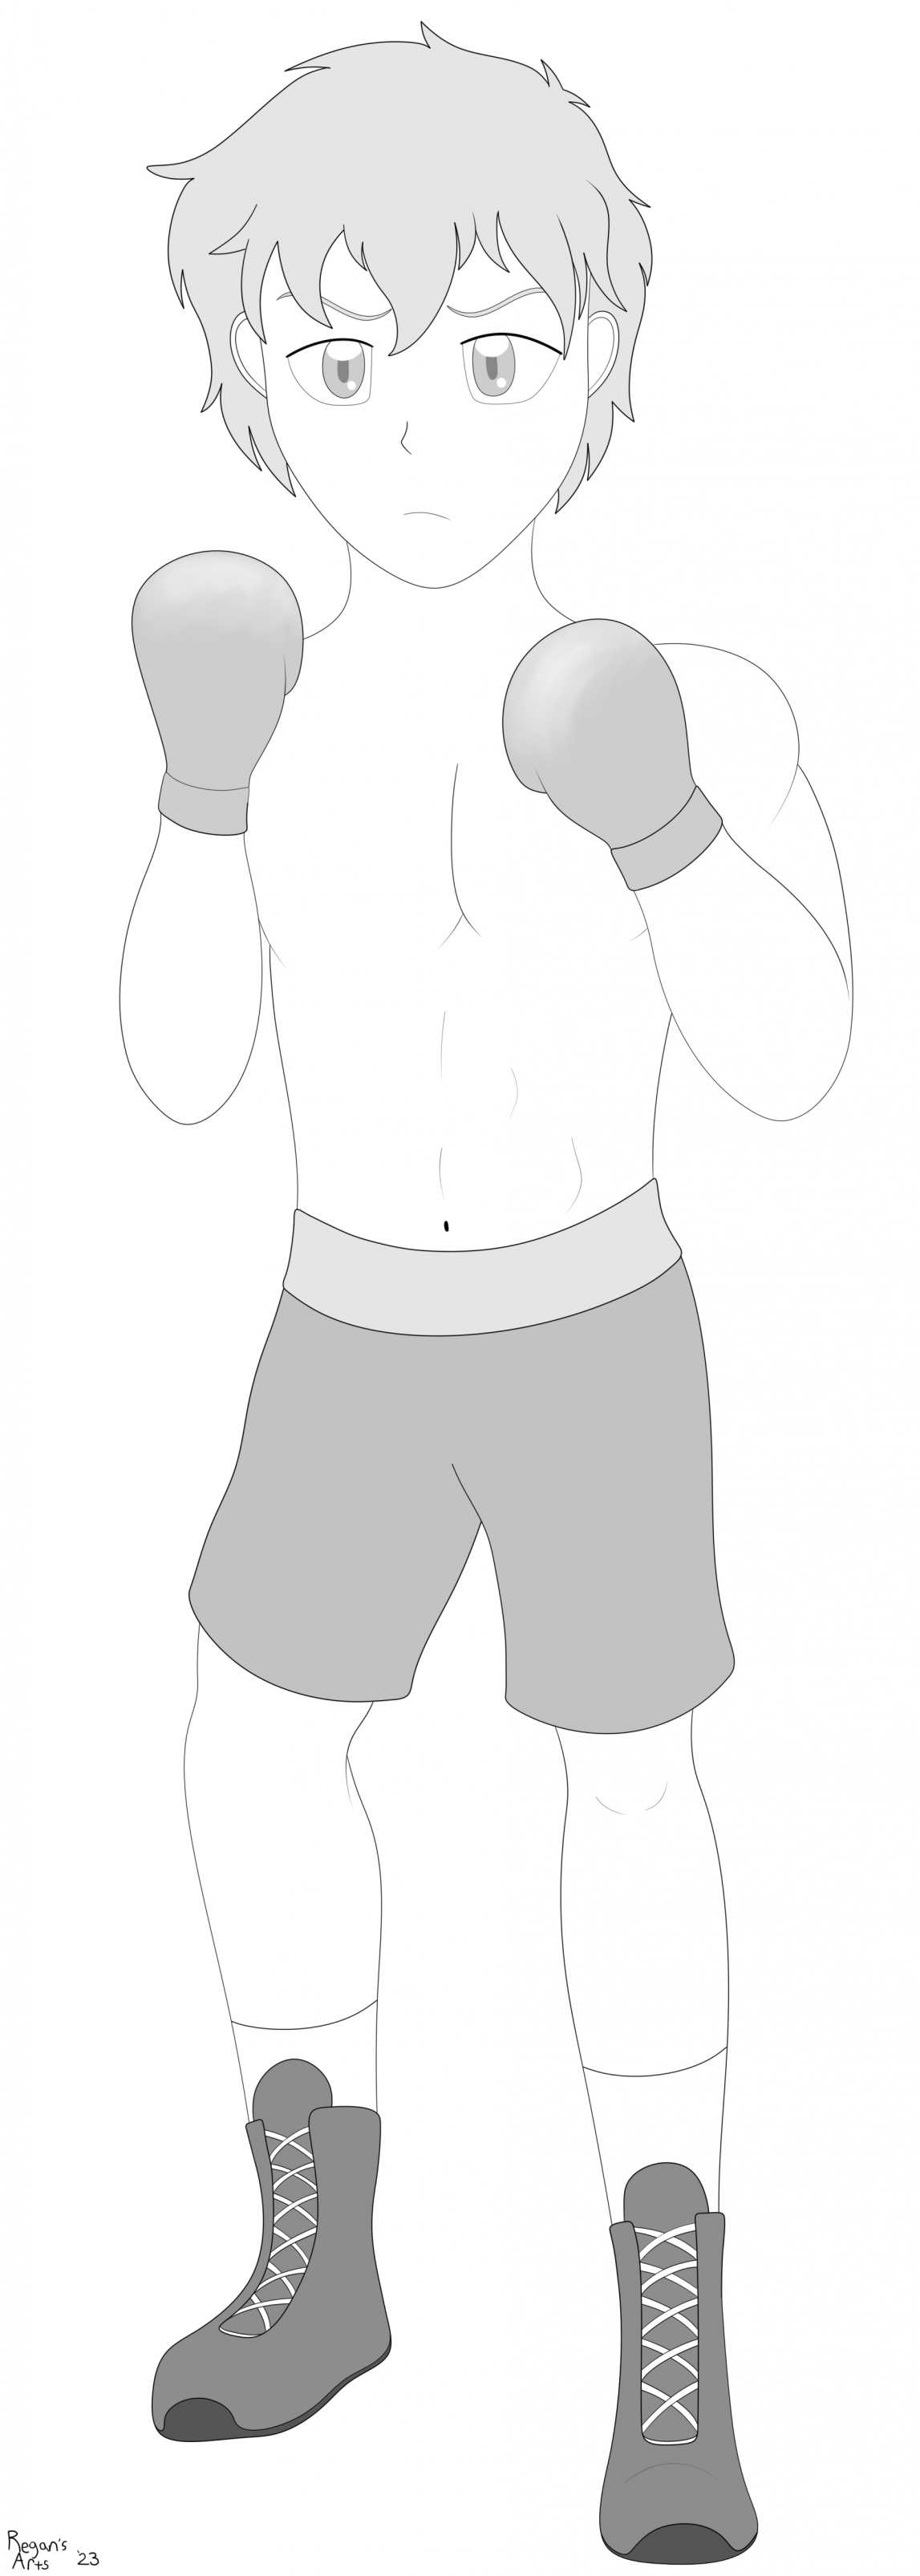 Kick boxing pose Outline Drawing Images, Pictures